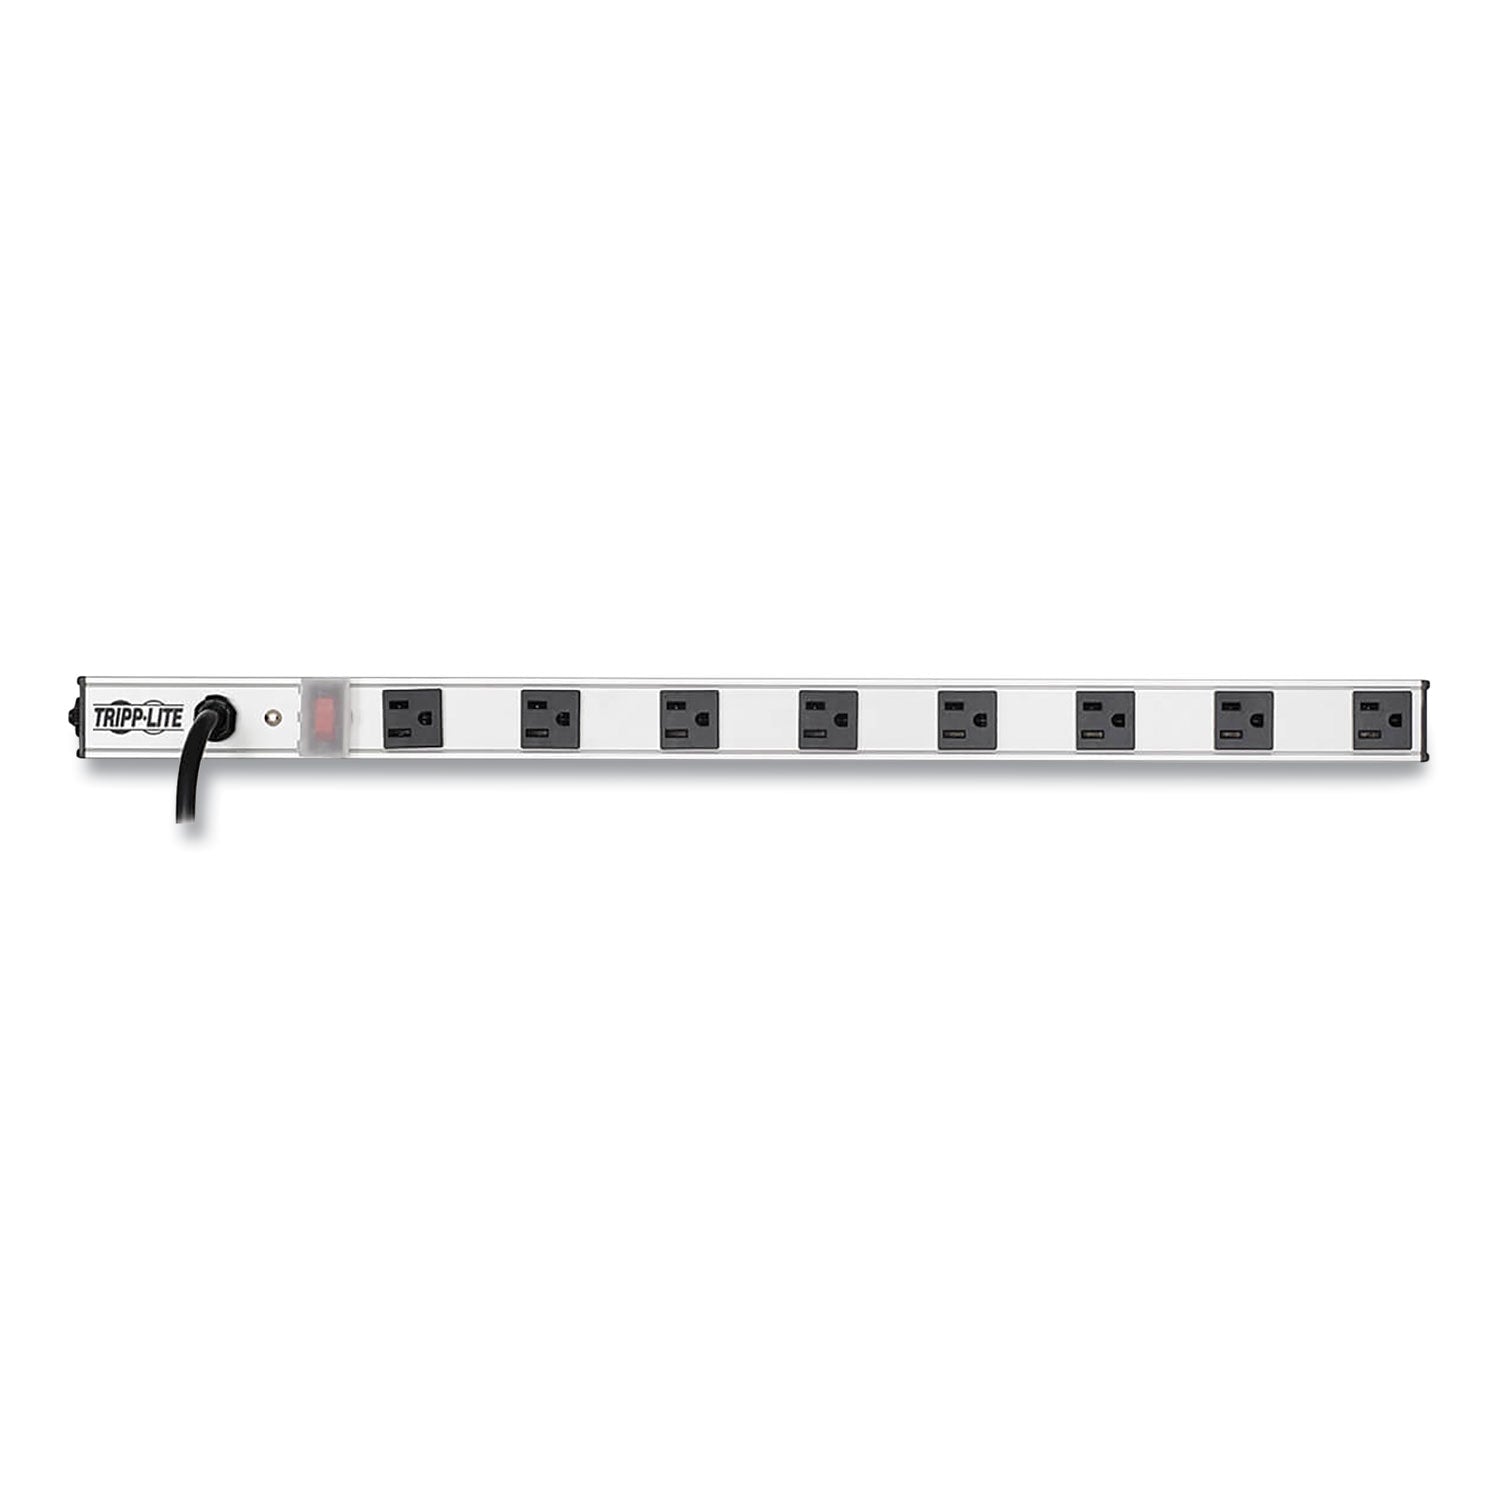 Vertical Power Strip, 8 Outlets, 15 ft Cord, Silver - 